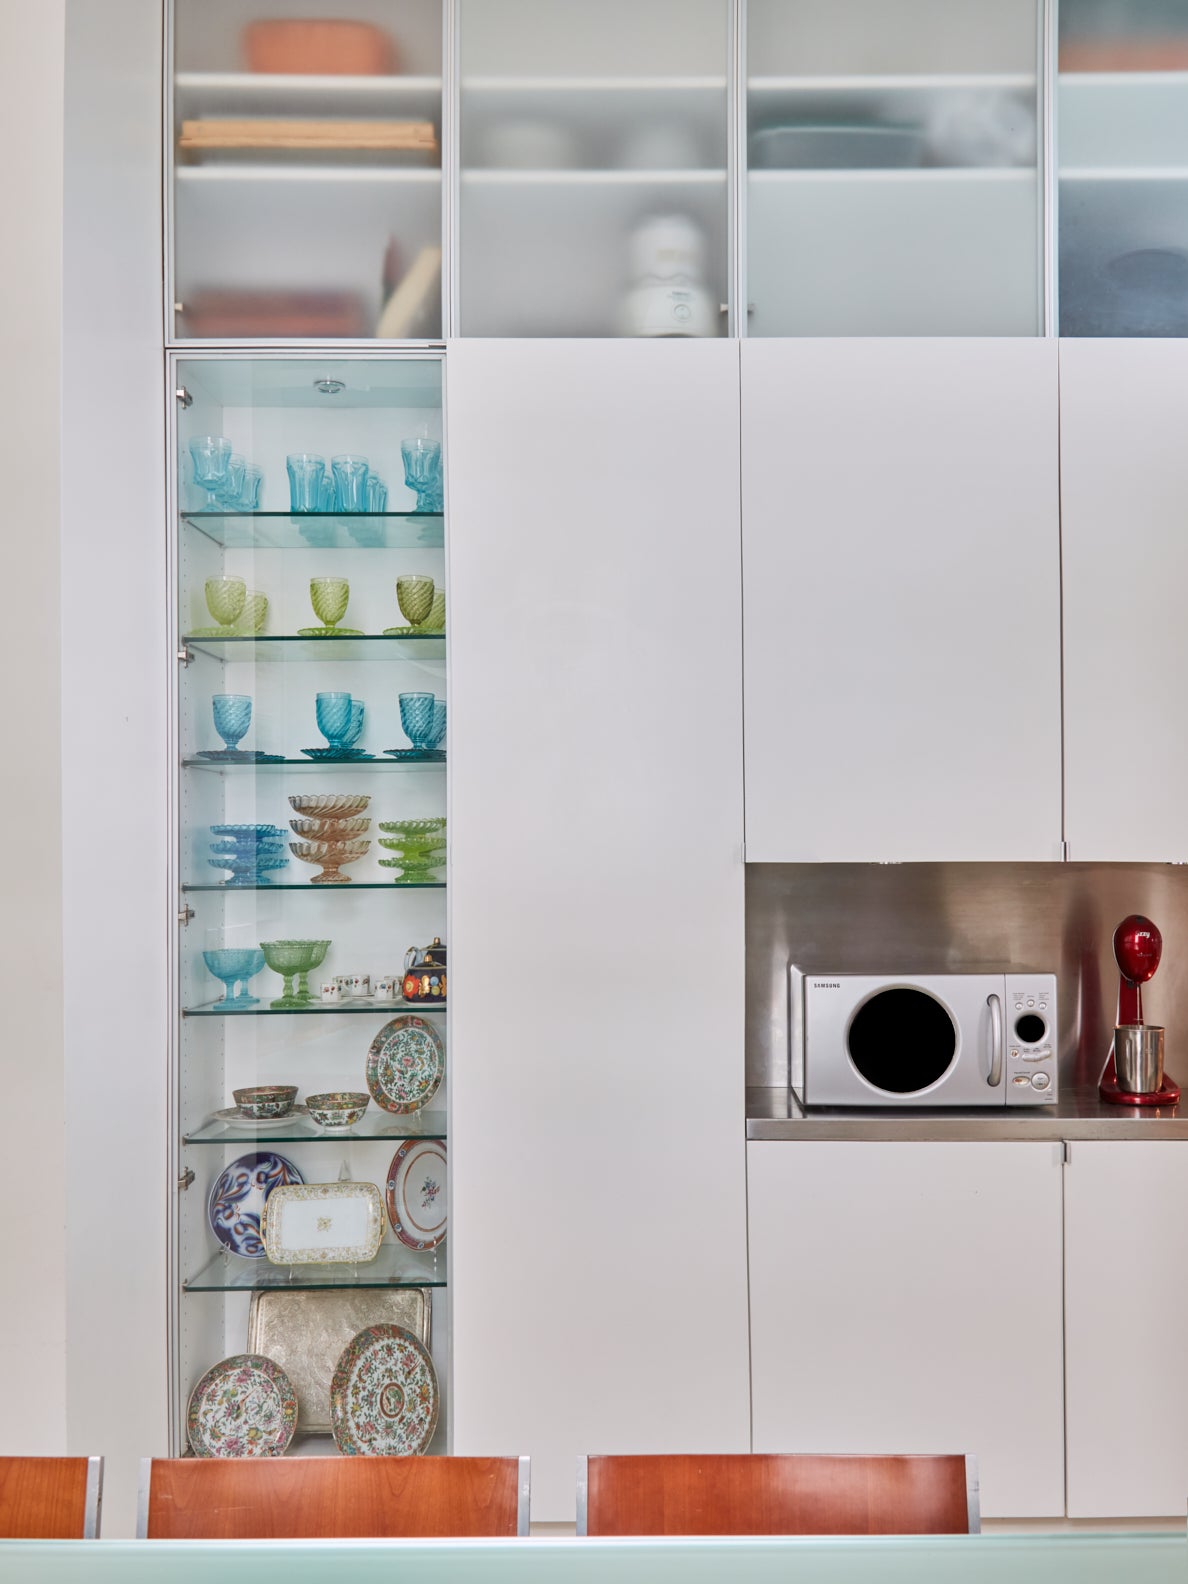 Kitchen cabinets with open shelving for glassware